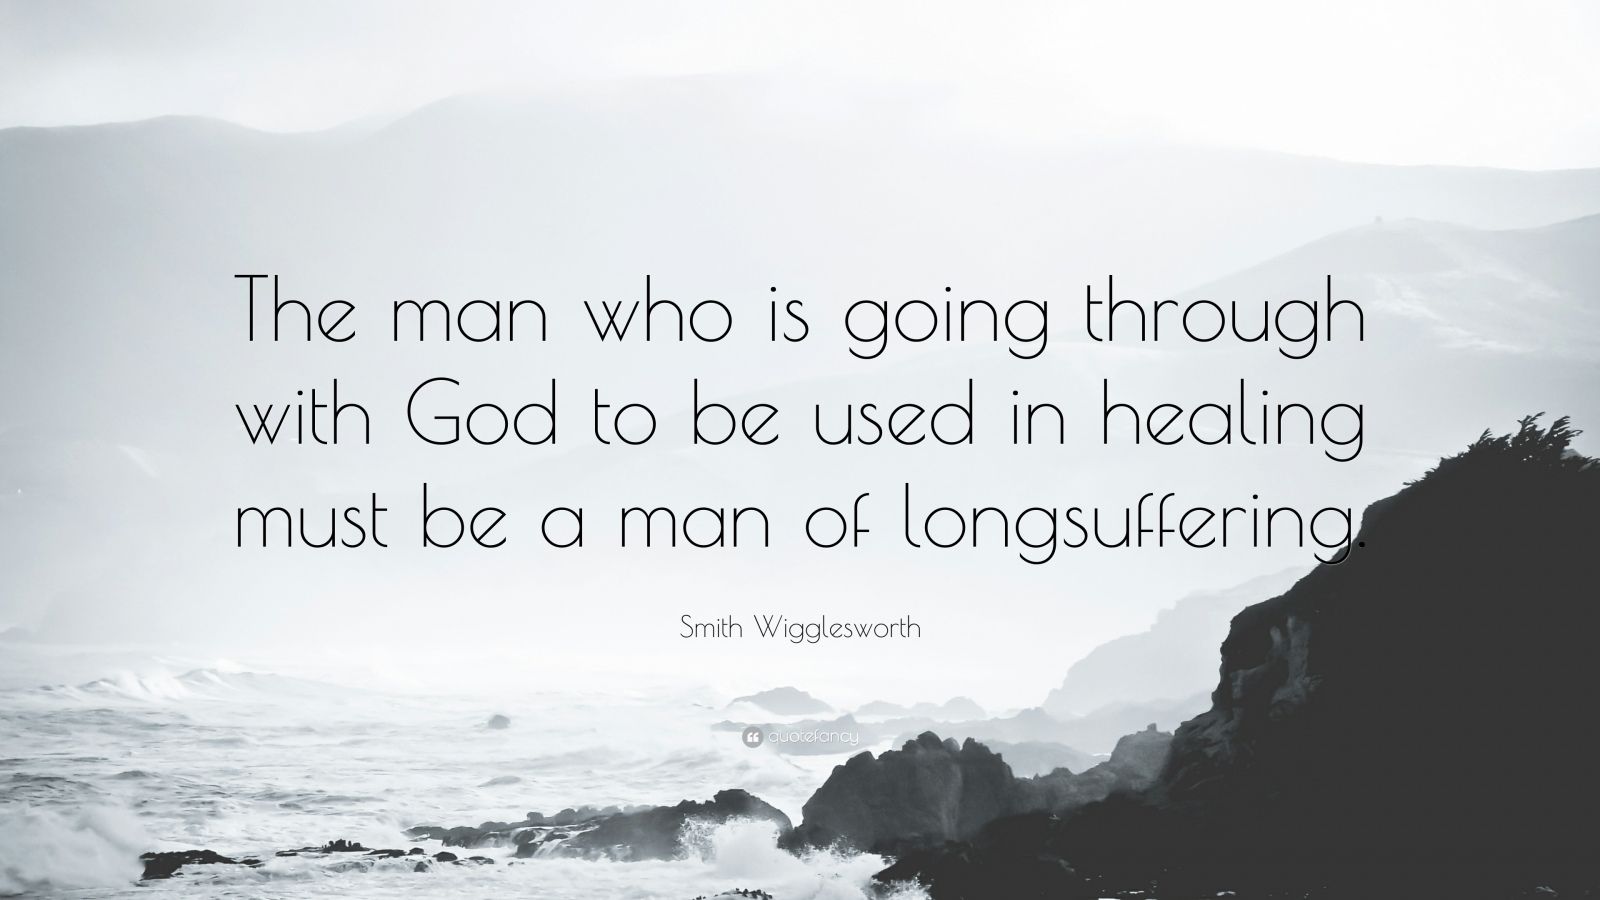 1923910 Smith Wigglesworth Quote The man who is going through with God to